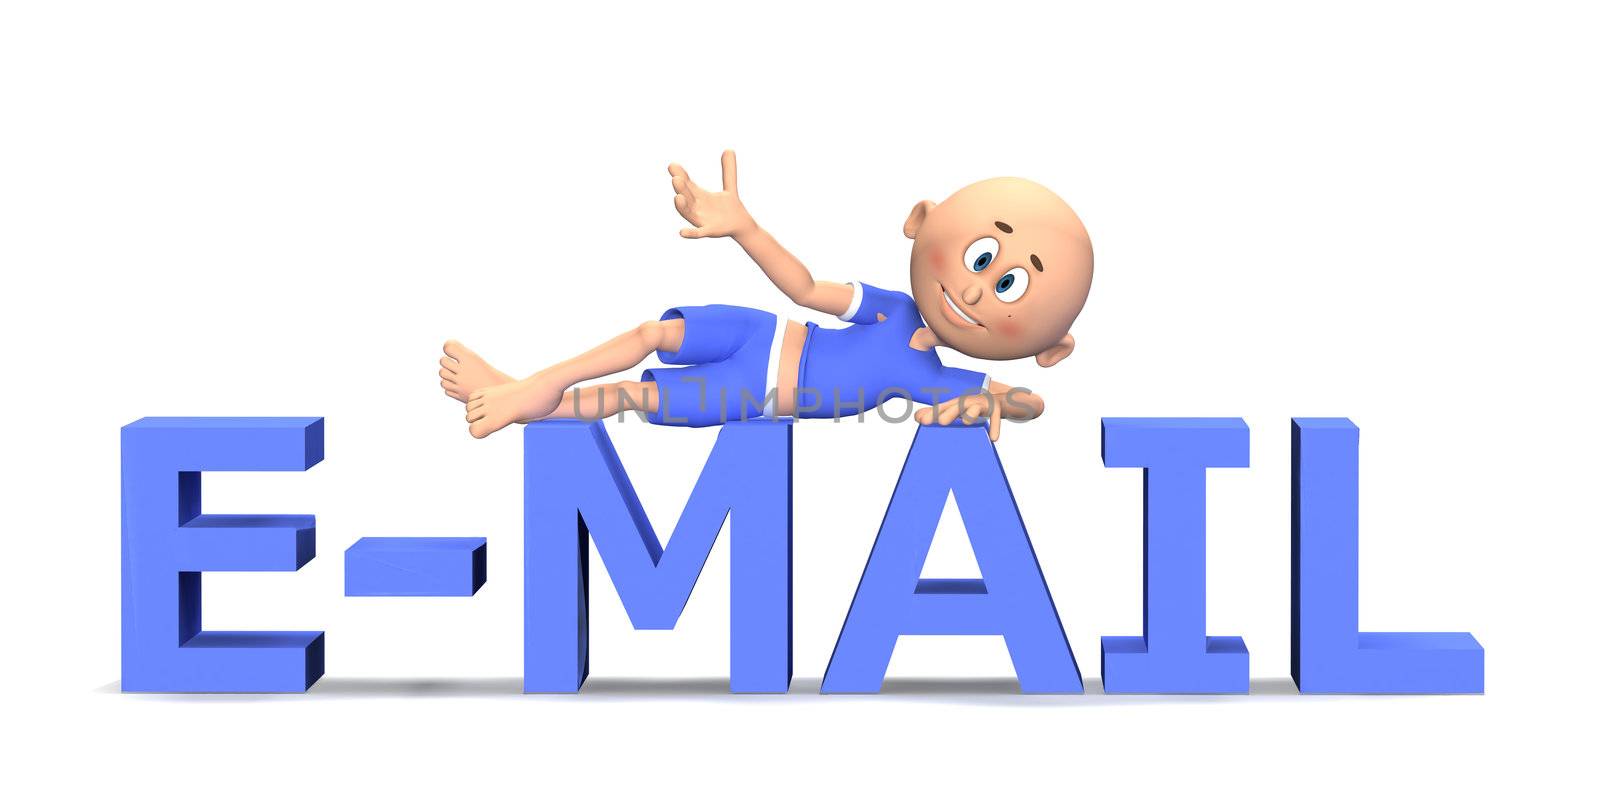 E-mail text in 3d with a cute toon guy on it